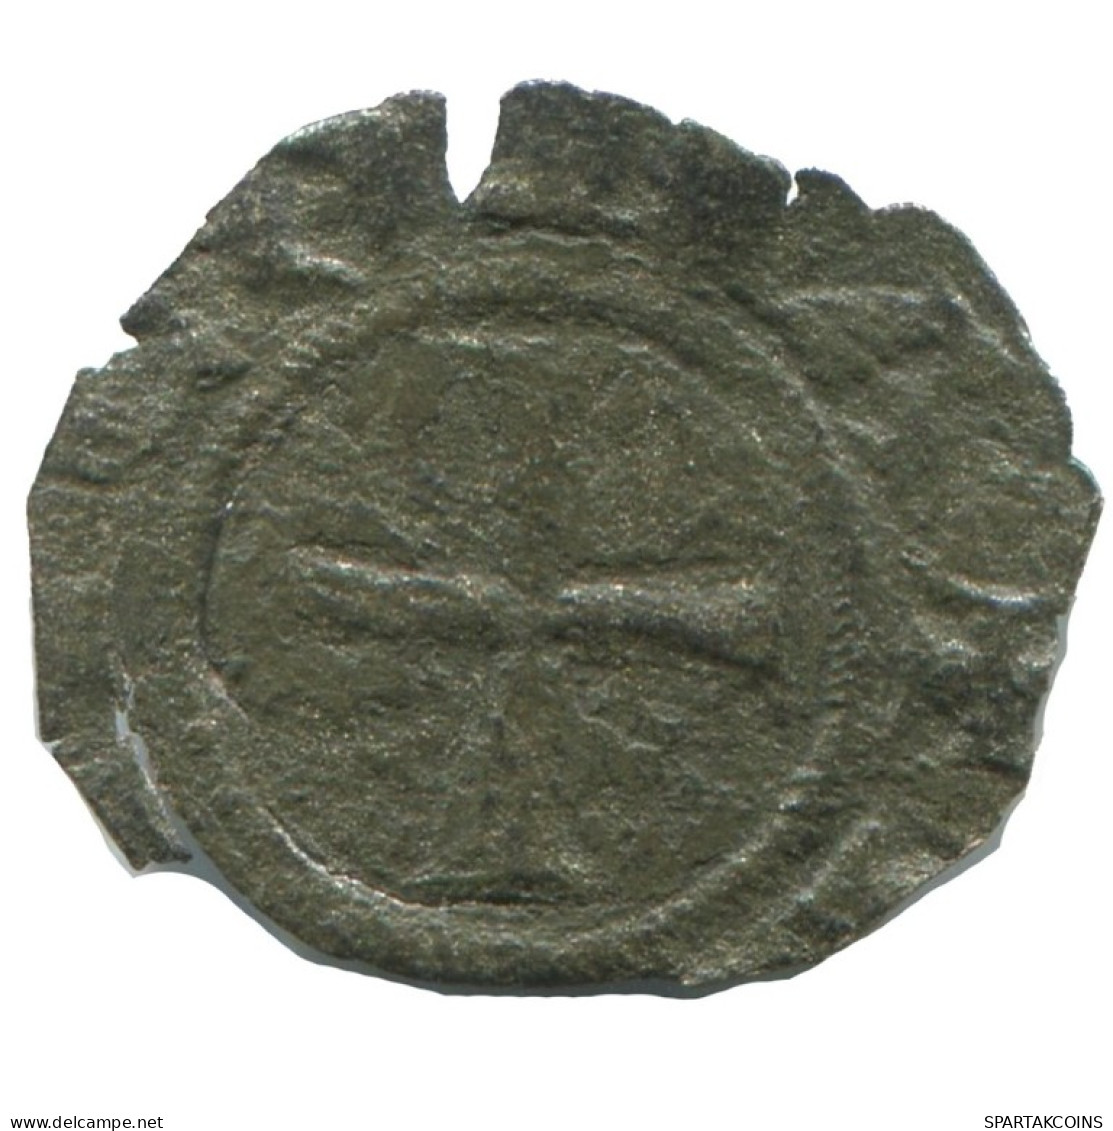 CRUSADER CROSS Authentic Original MEDIEVAL EUROPEAN Coin 0.3g/15mm #AC397.8.U.A - Other - Europe